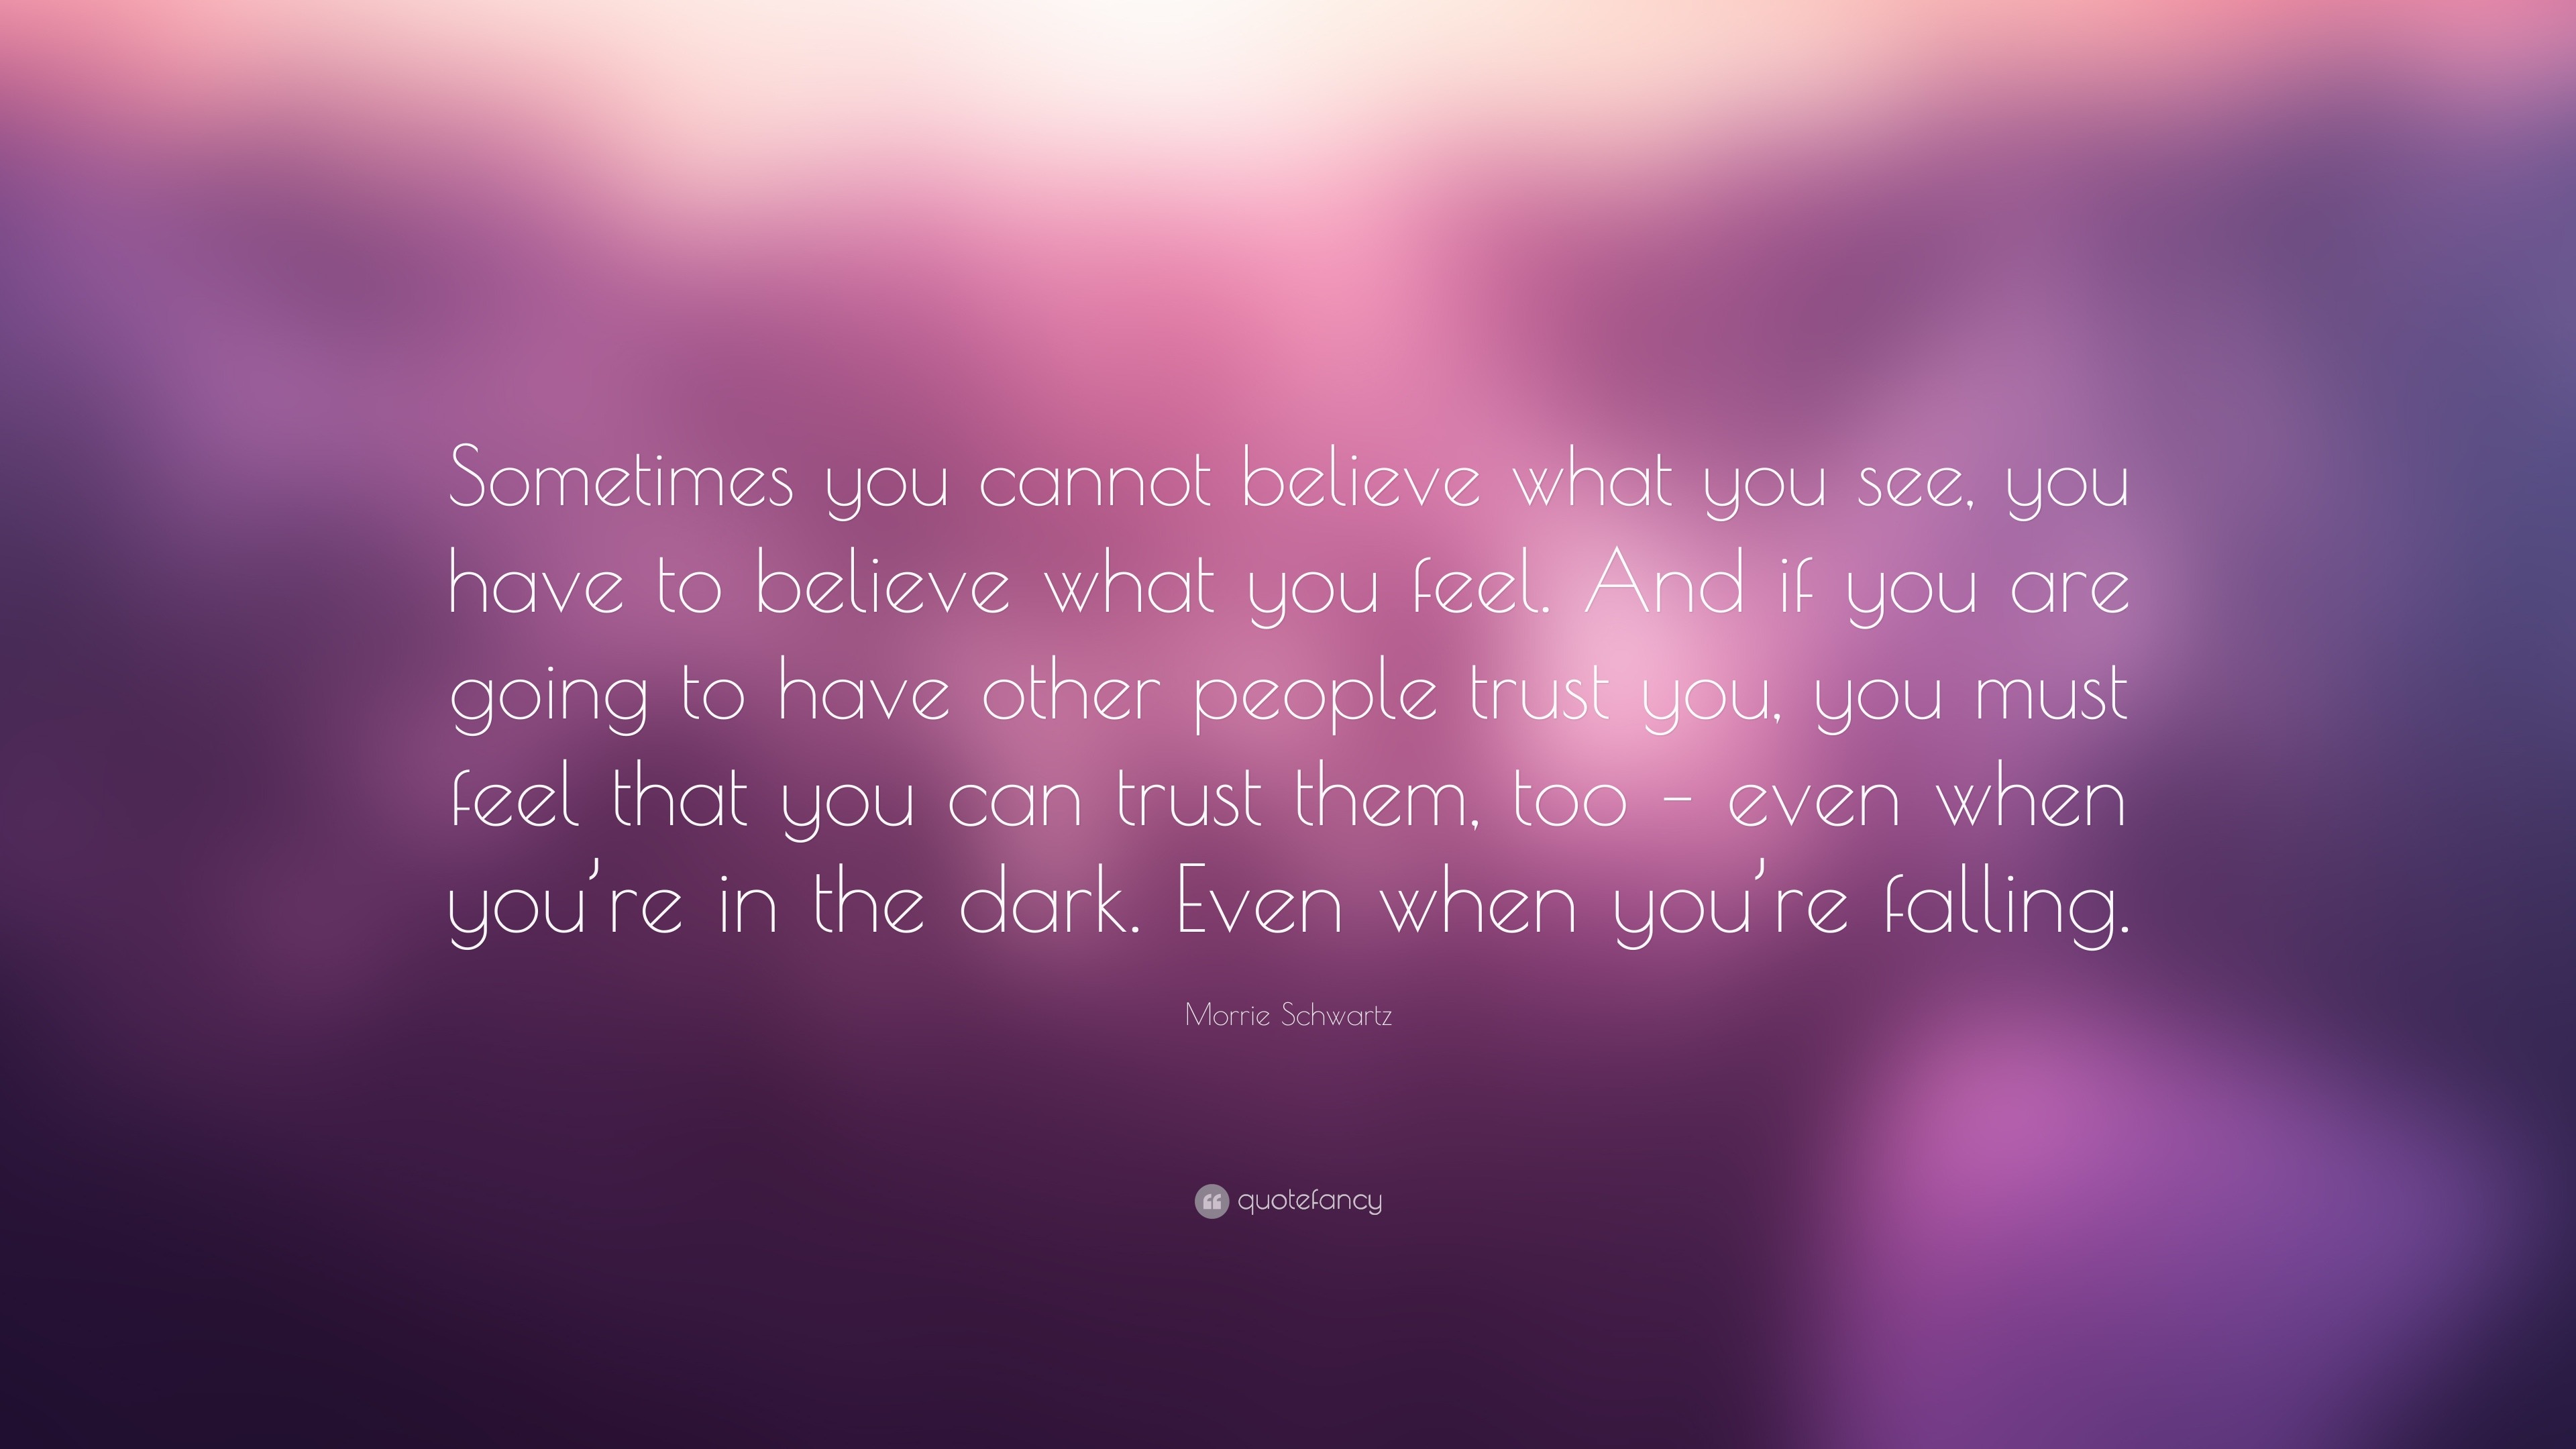 Morrie Schwartz Quote: “Sometimes you cannot believe what you see, you ...